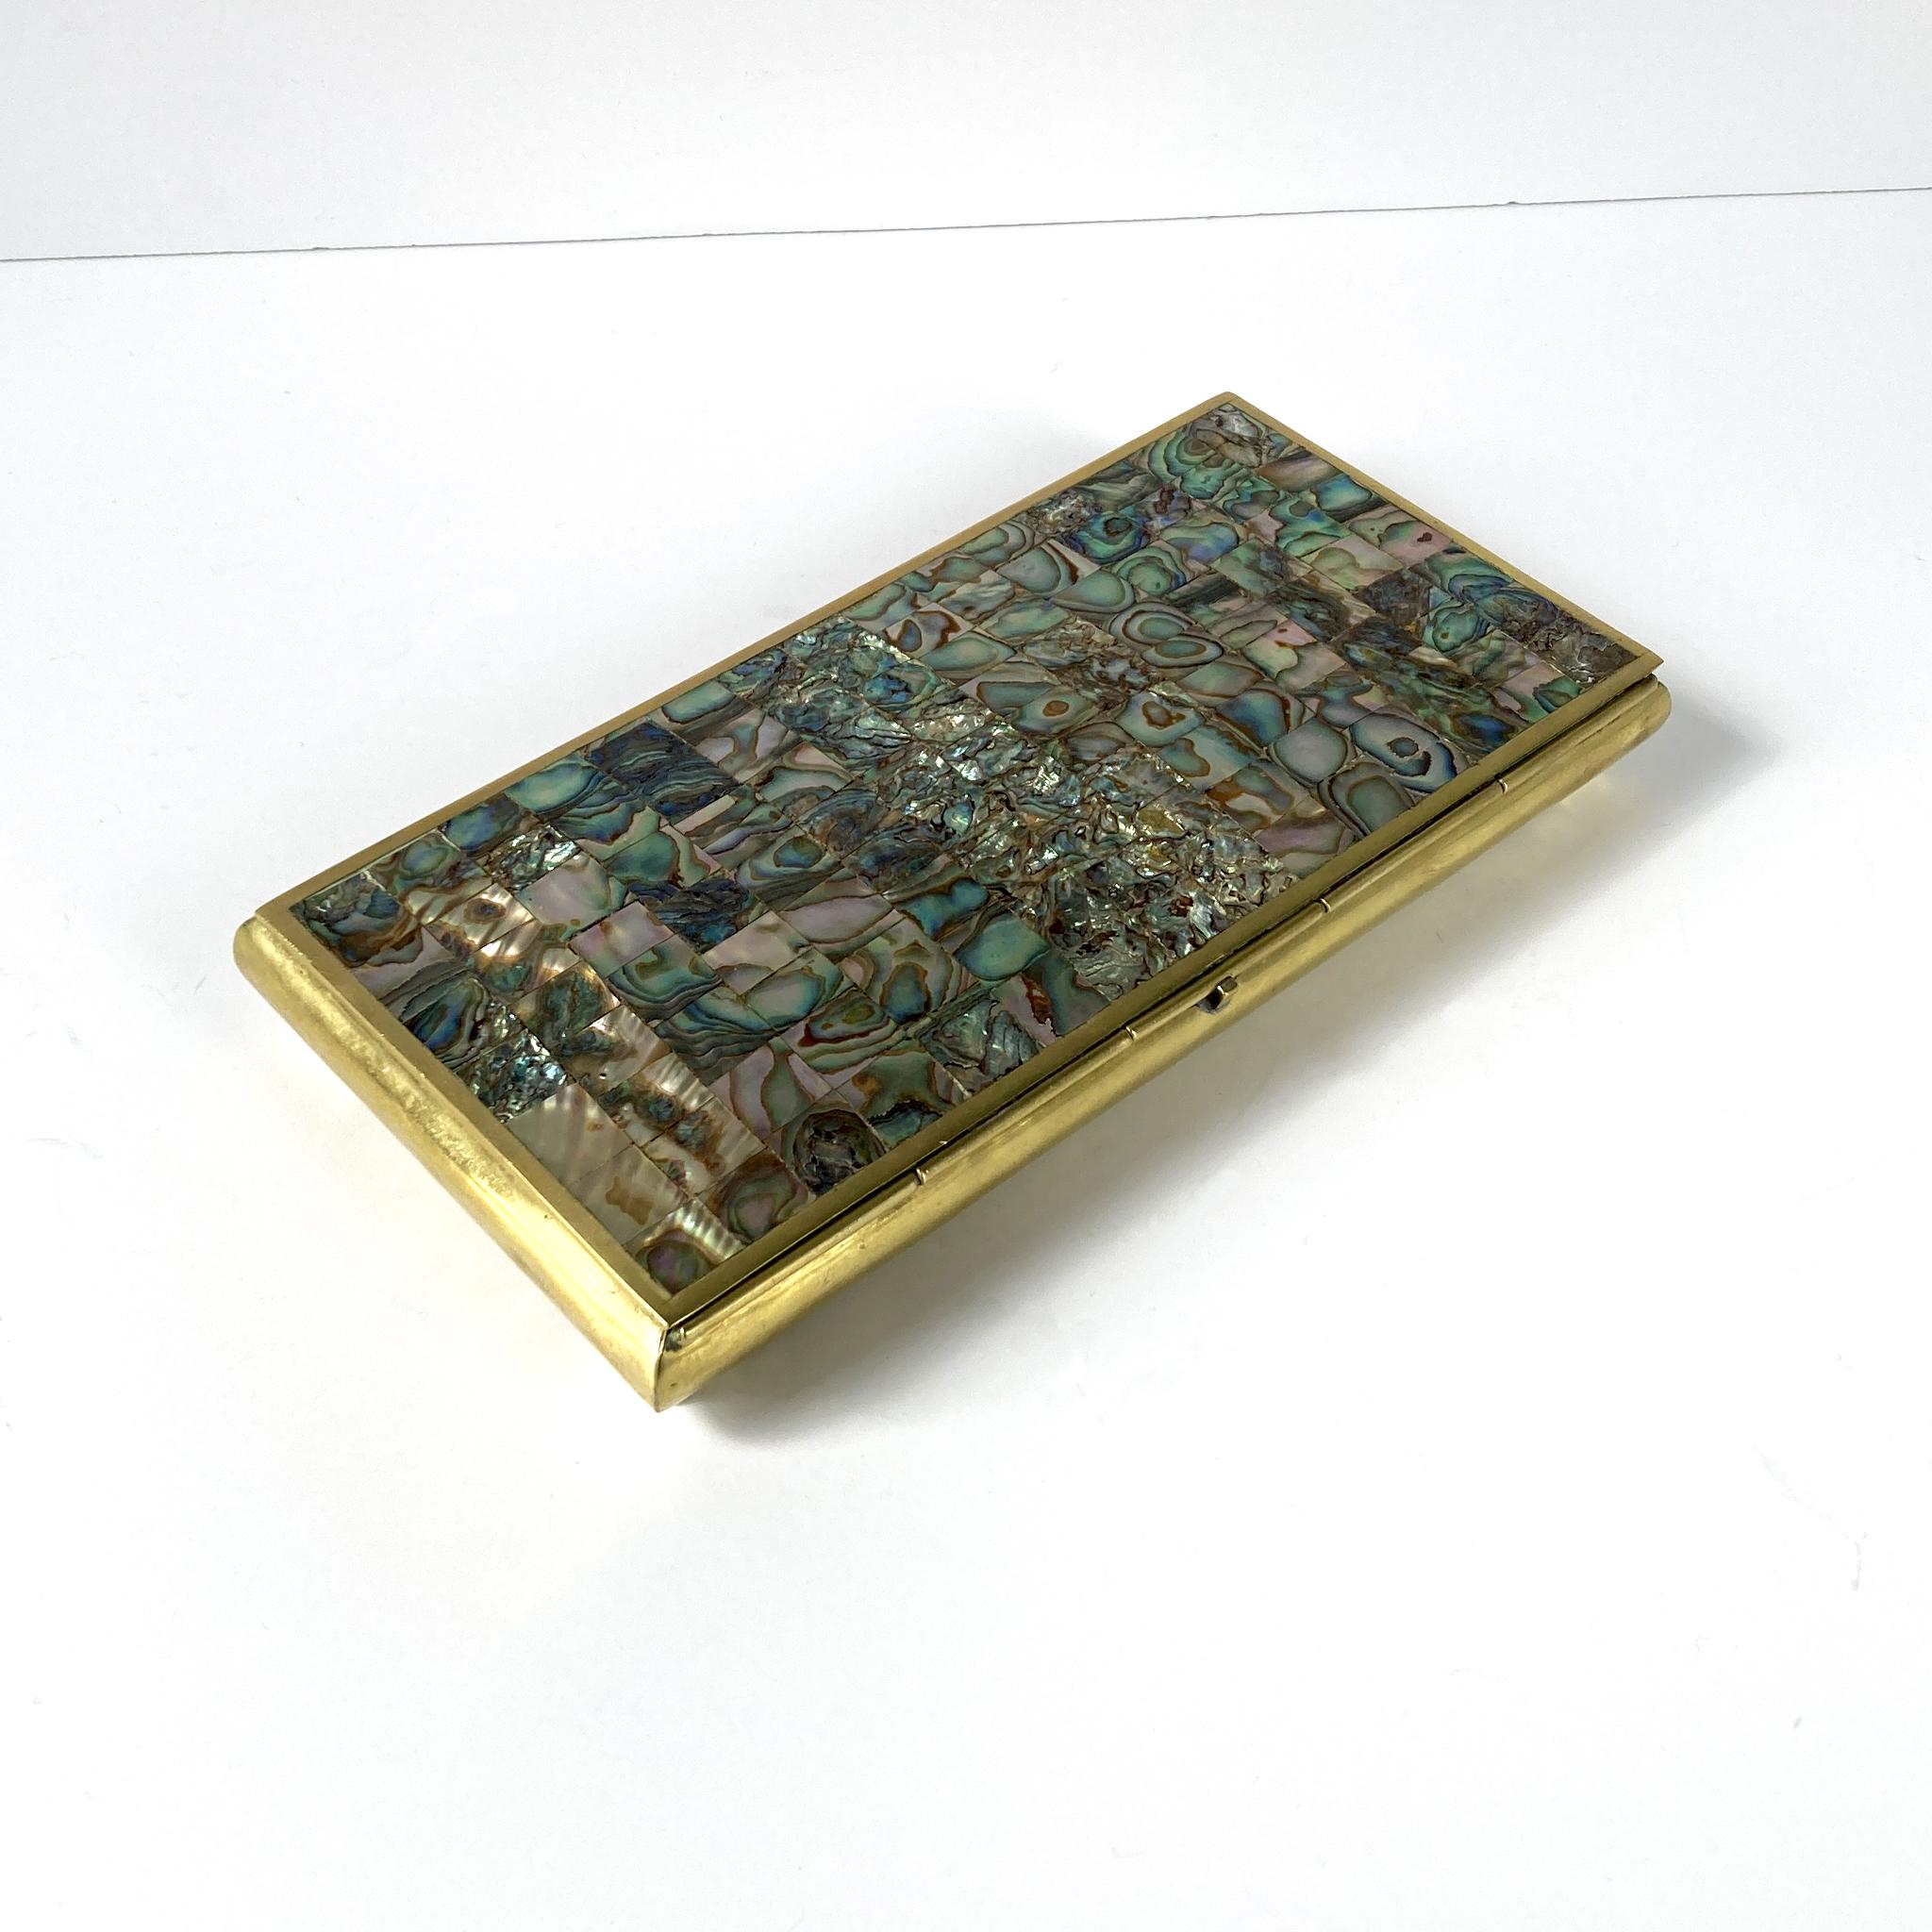 Midcentury Hinged Abalone Shell and Brass Box, Mosaic Pattern on Lid, Wood-lined For Sale 1